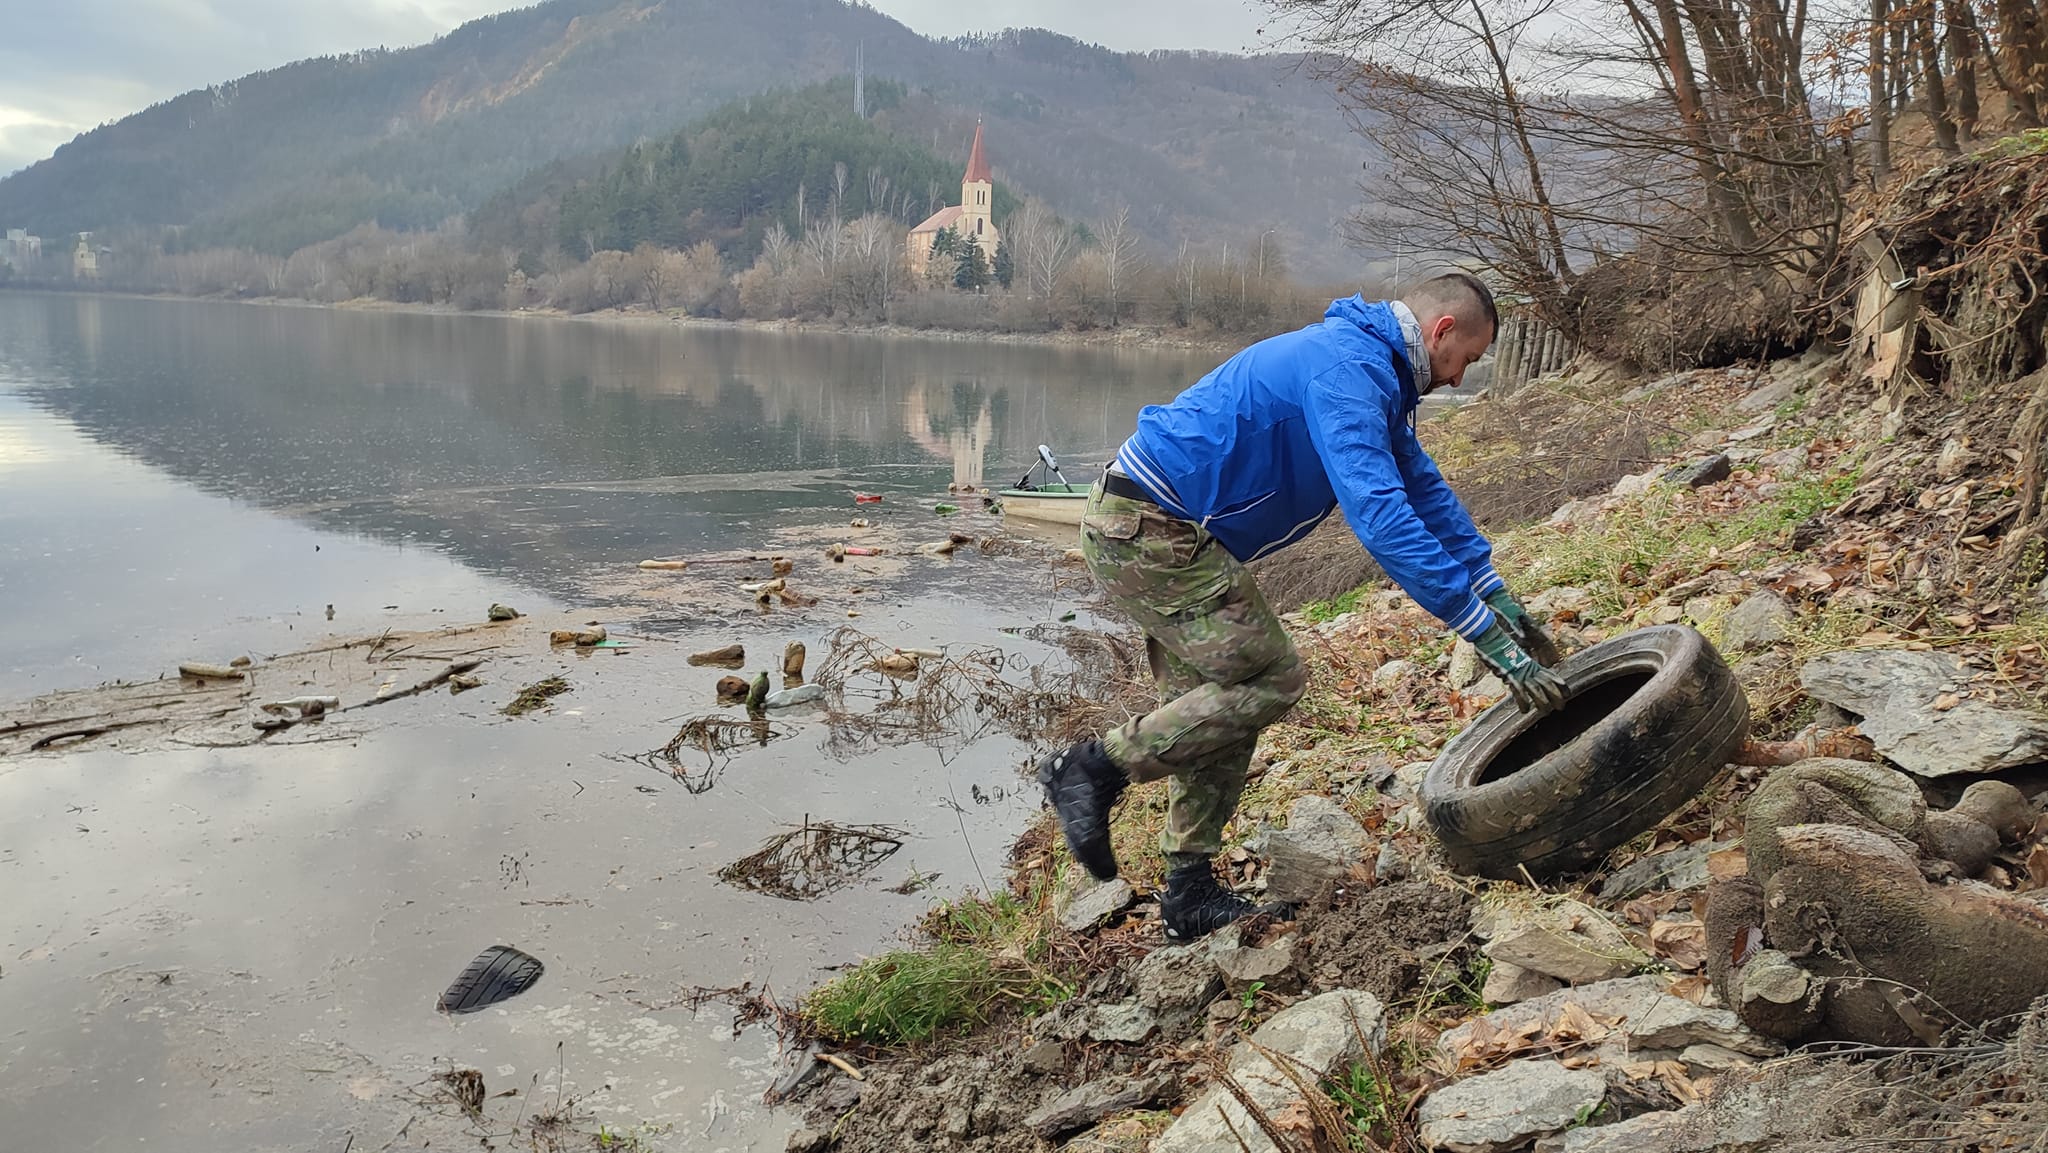 THE UPCOMING CLEANUPS IN KOŠICE REGION